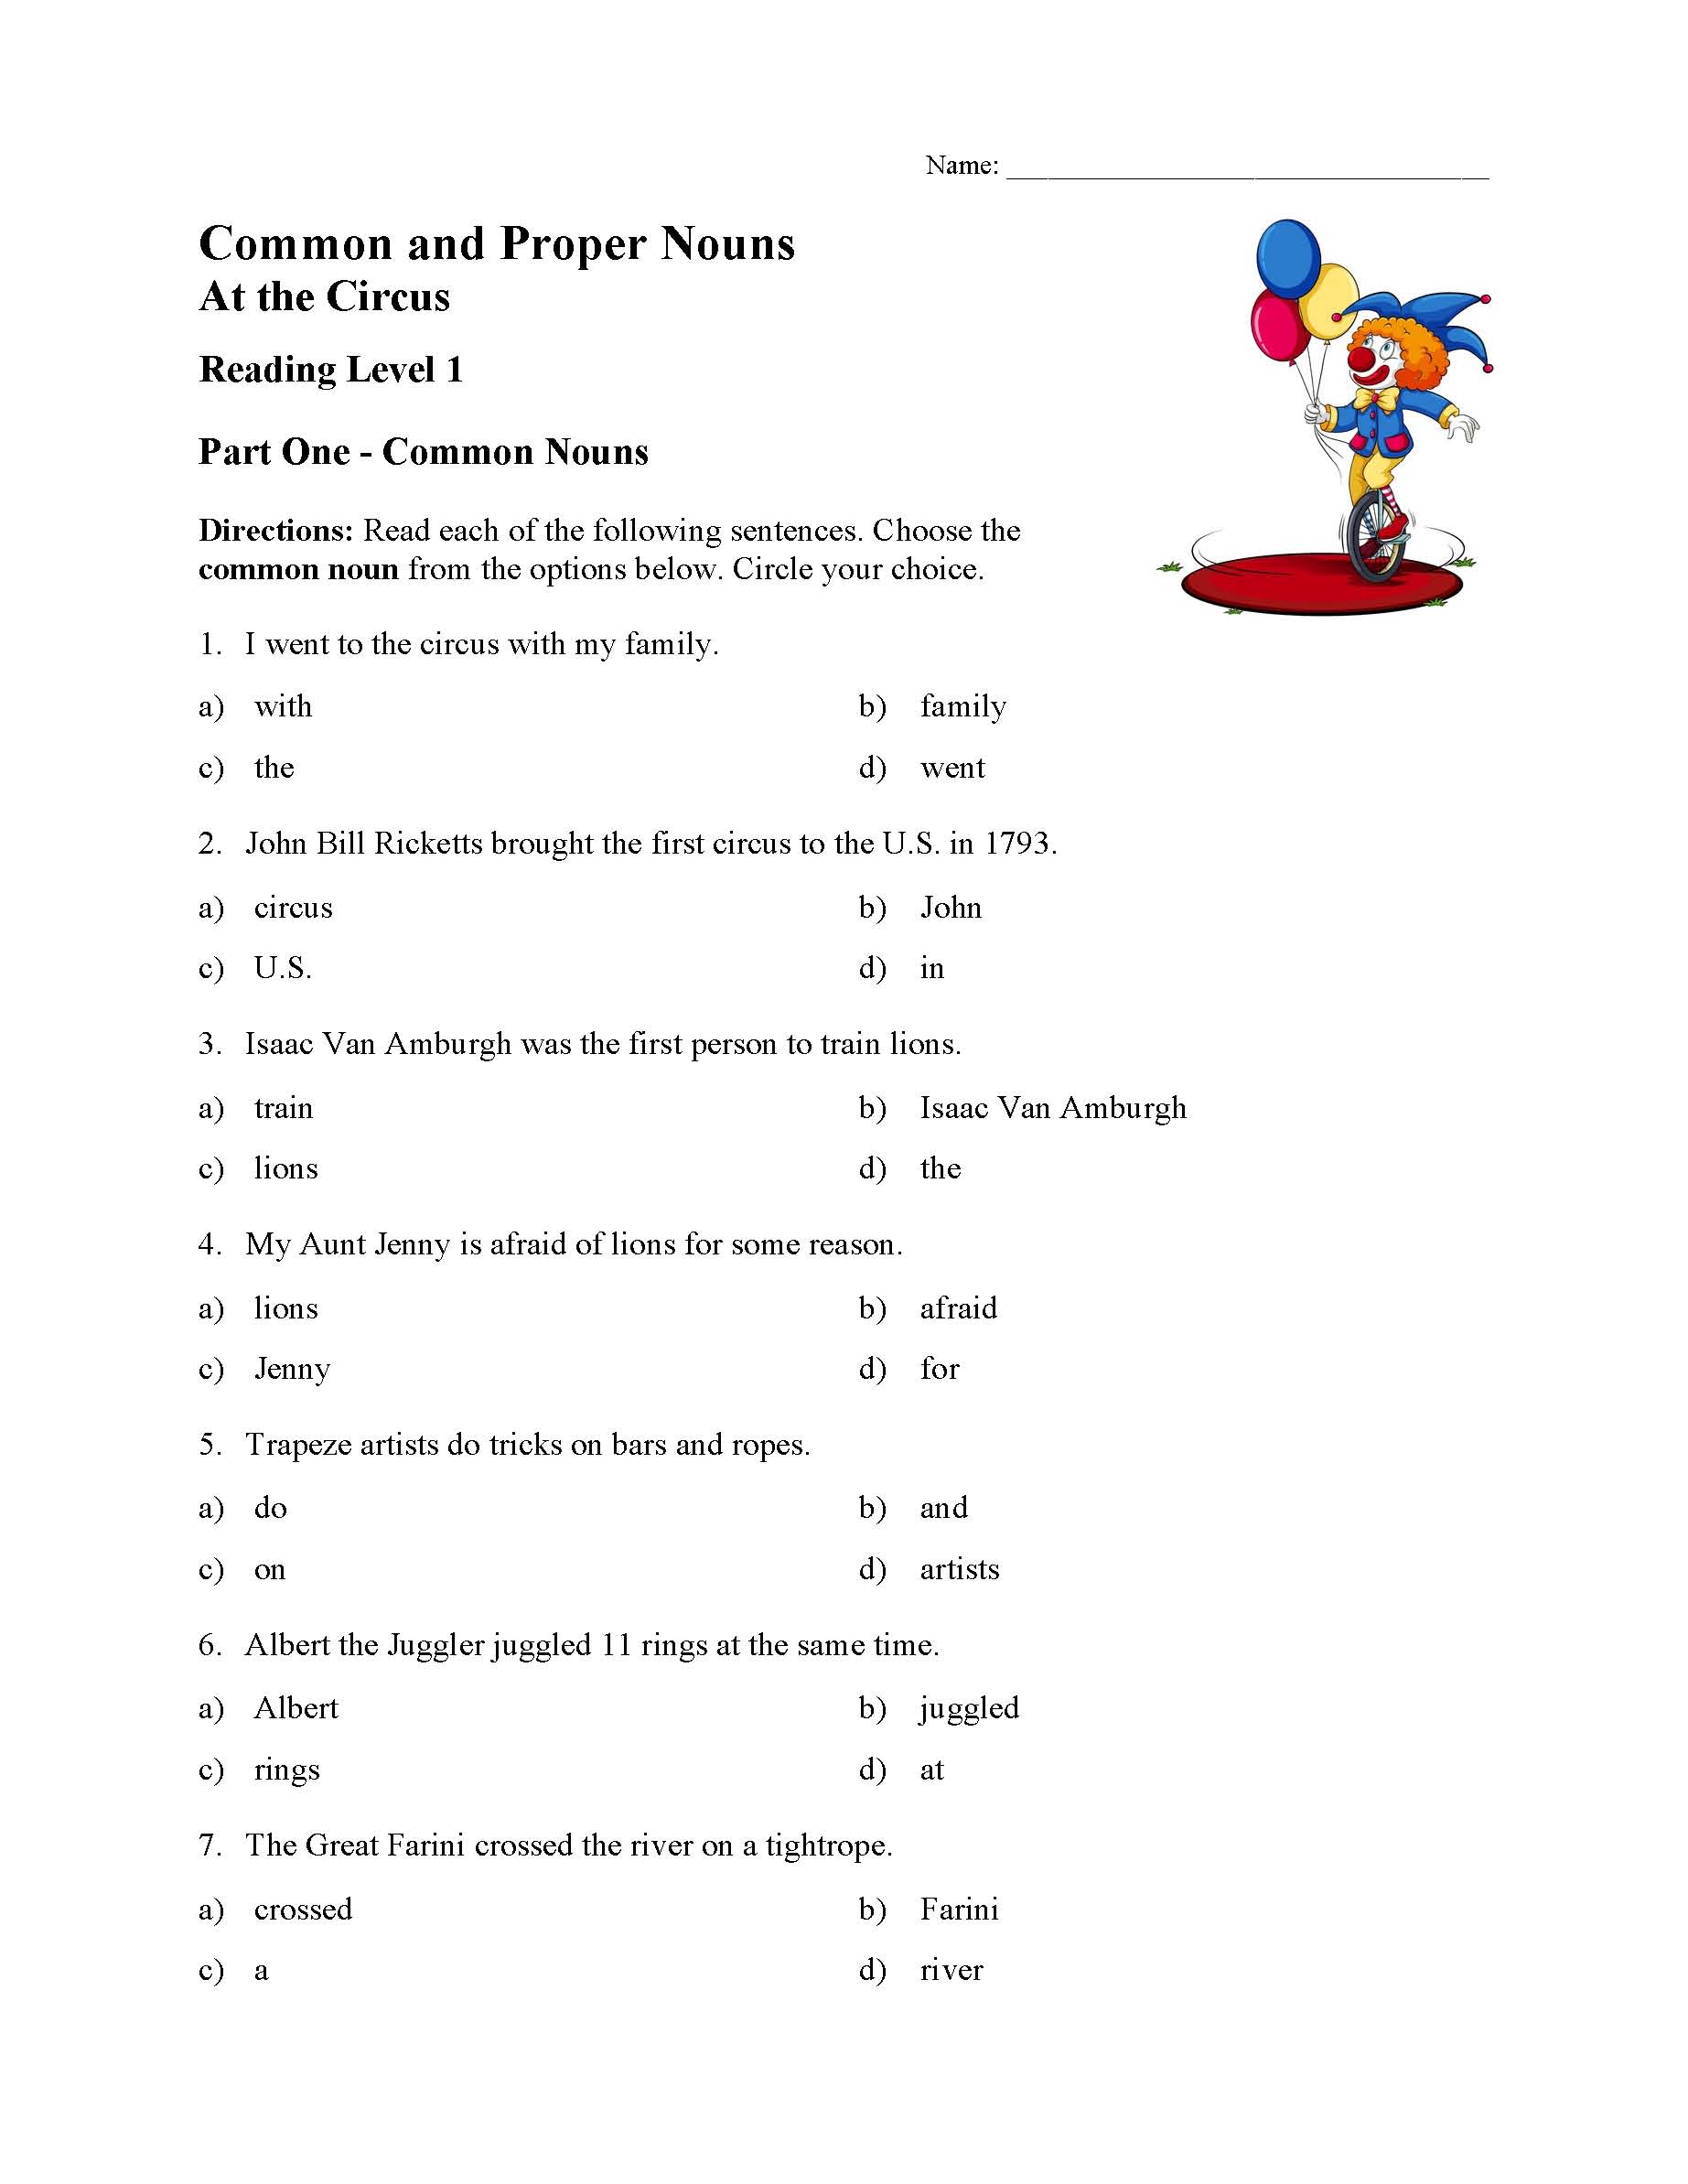 Common And Proper Nouns Test 1 Reading Level 1 Preview